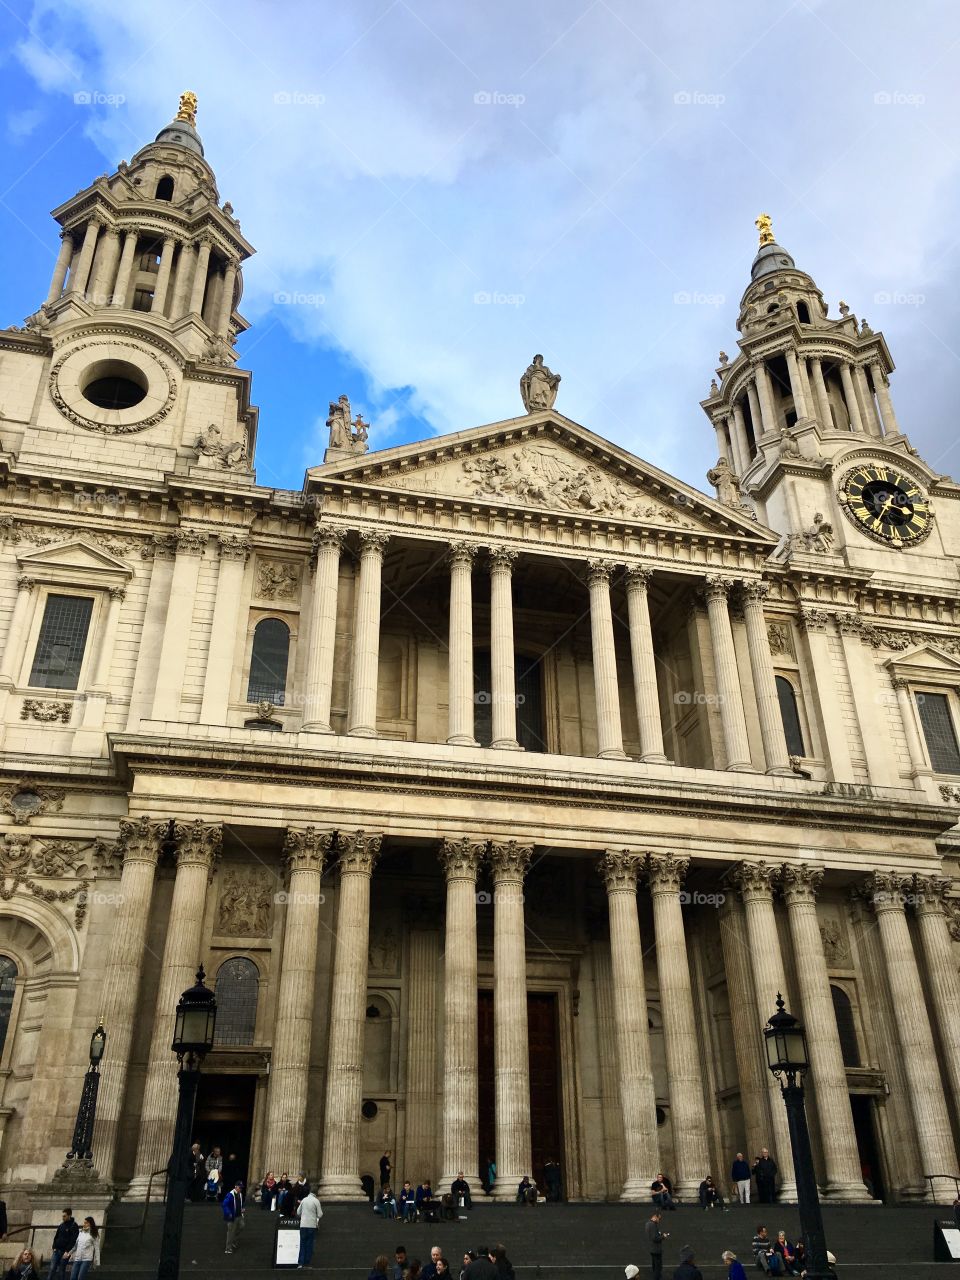 St Paul's Cathedral, London 